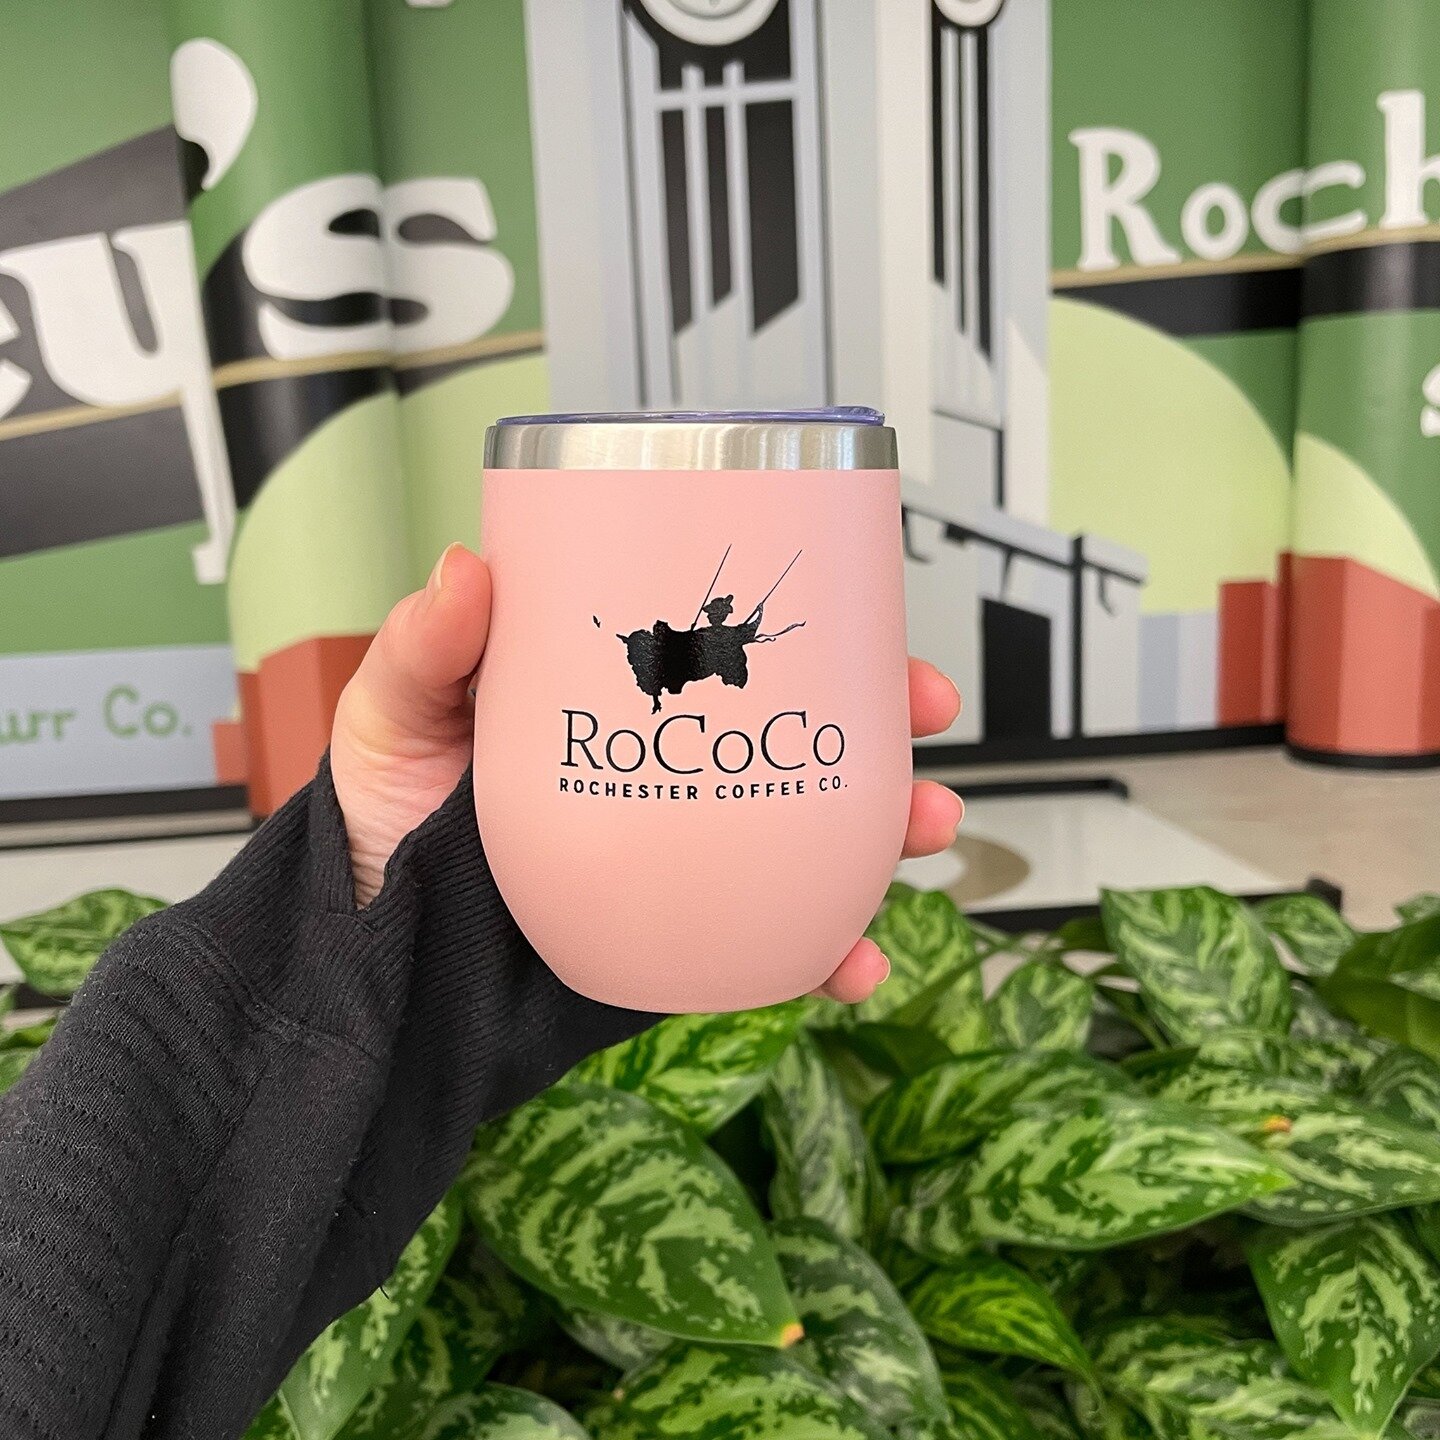 Coffee to go looks so good when you have your Rococo travel mug with you! ⁠
⁠
⁠
⁠
Located in the Sibley Building @Merconmain at 240 East Main Street! Open 6:30a-4pm everyday! ⁠
⁠
⁠
#rochesterny #roccoffee #roccoffeesociety #585 #supportlocal